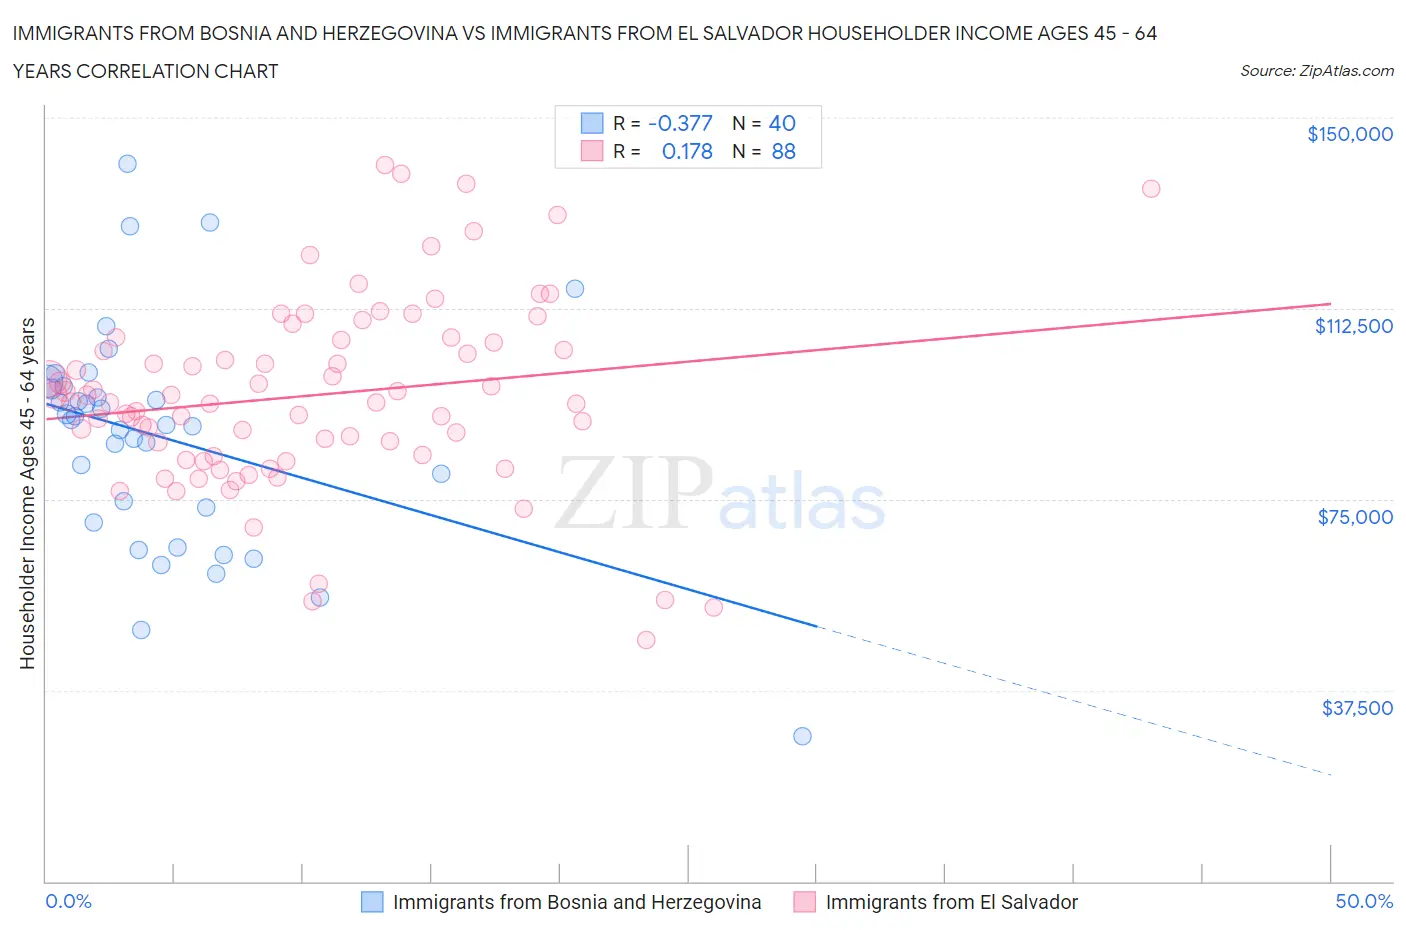 Immigrants from Bosnia and Herzegovina vs Immigrants from El Salvador Householder Income Ages 45 - 64 years